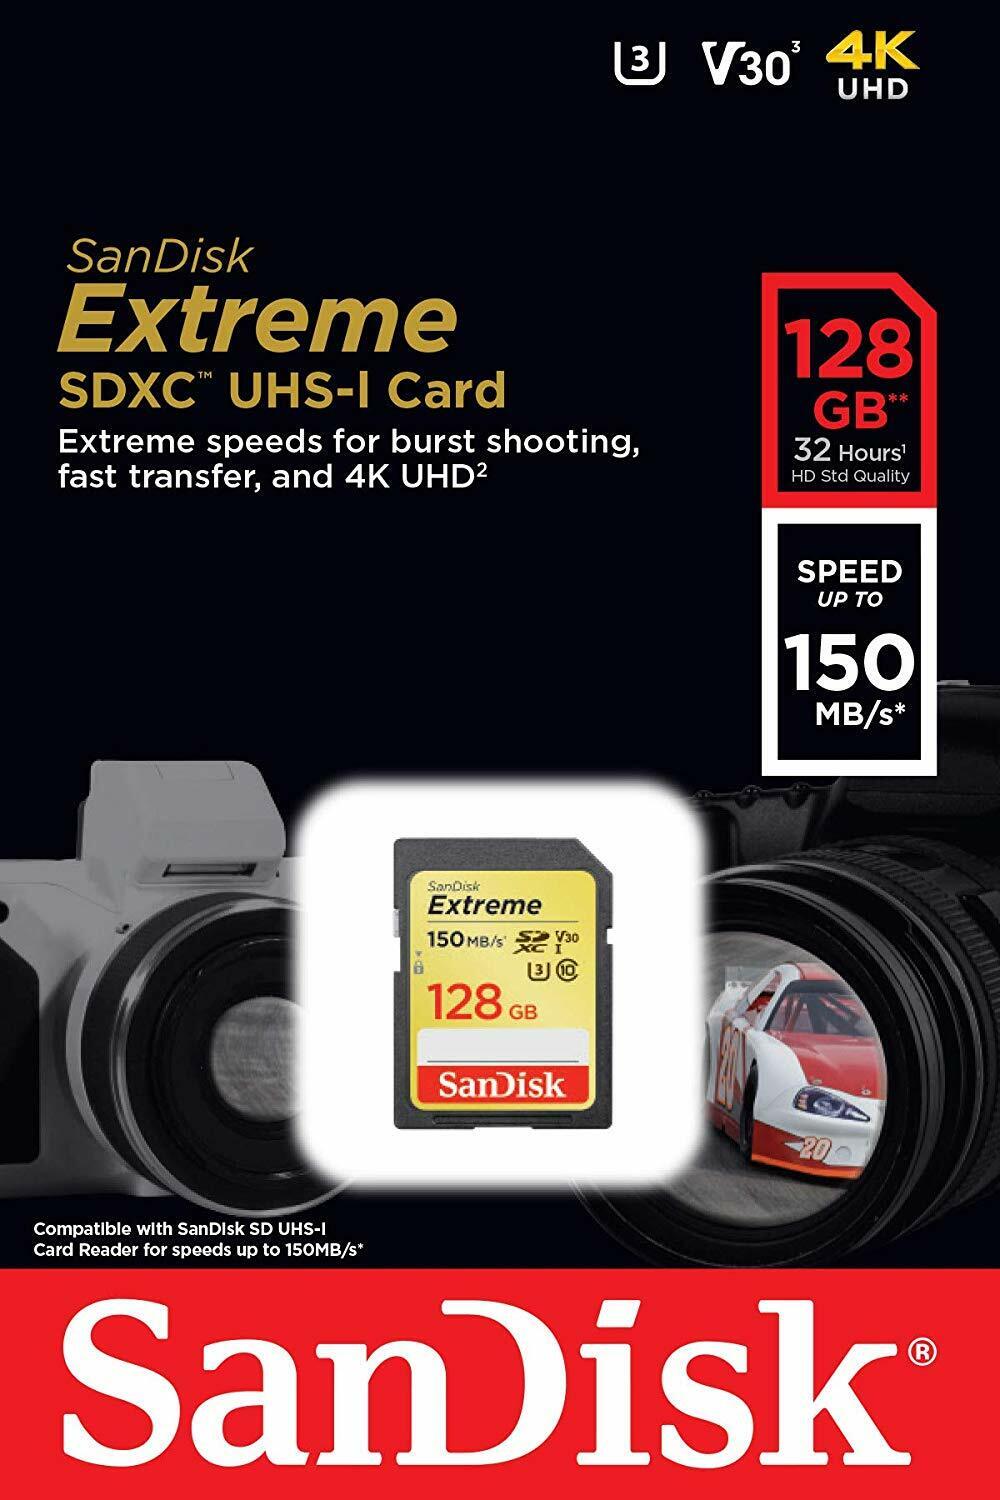 SanDisk Extreme 128GB SDXC 150MB/S 1000x UHS-1 SD Class 10 Memory Card 128G 4K